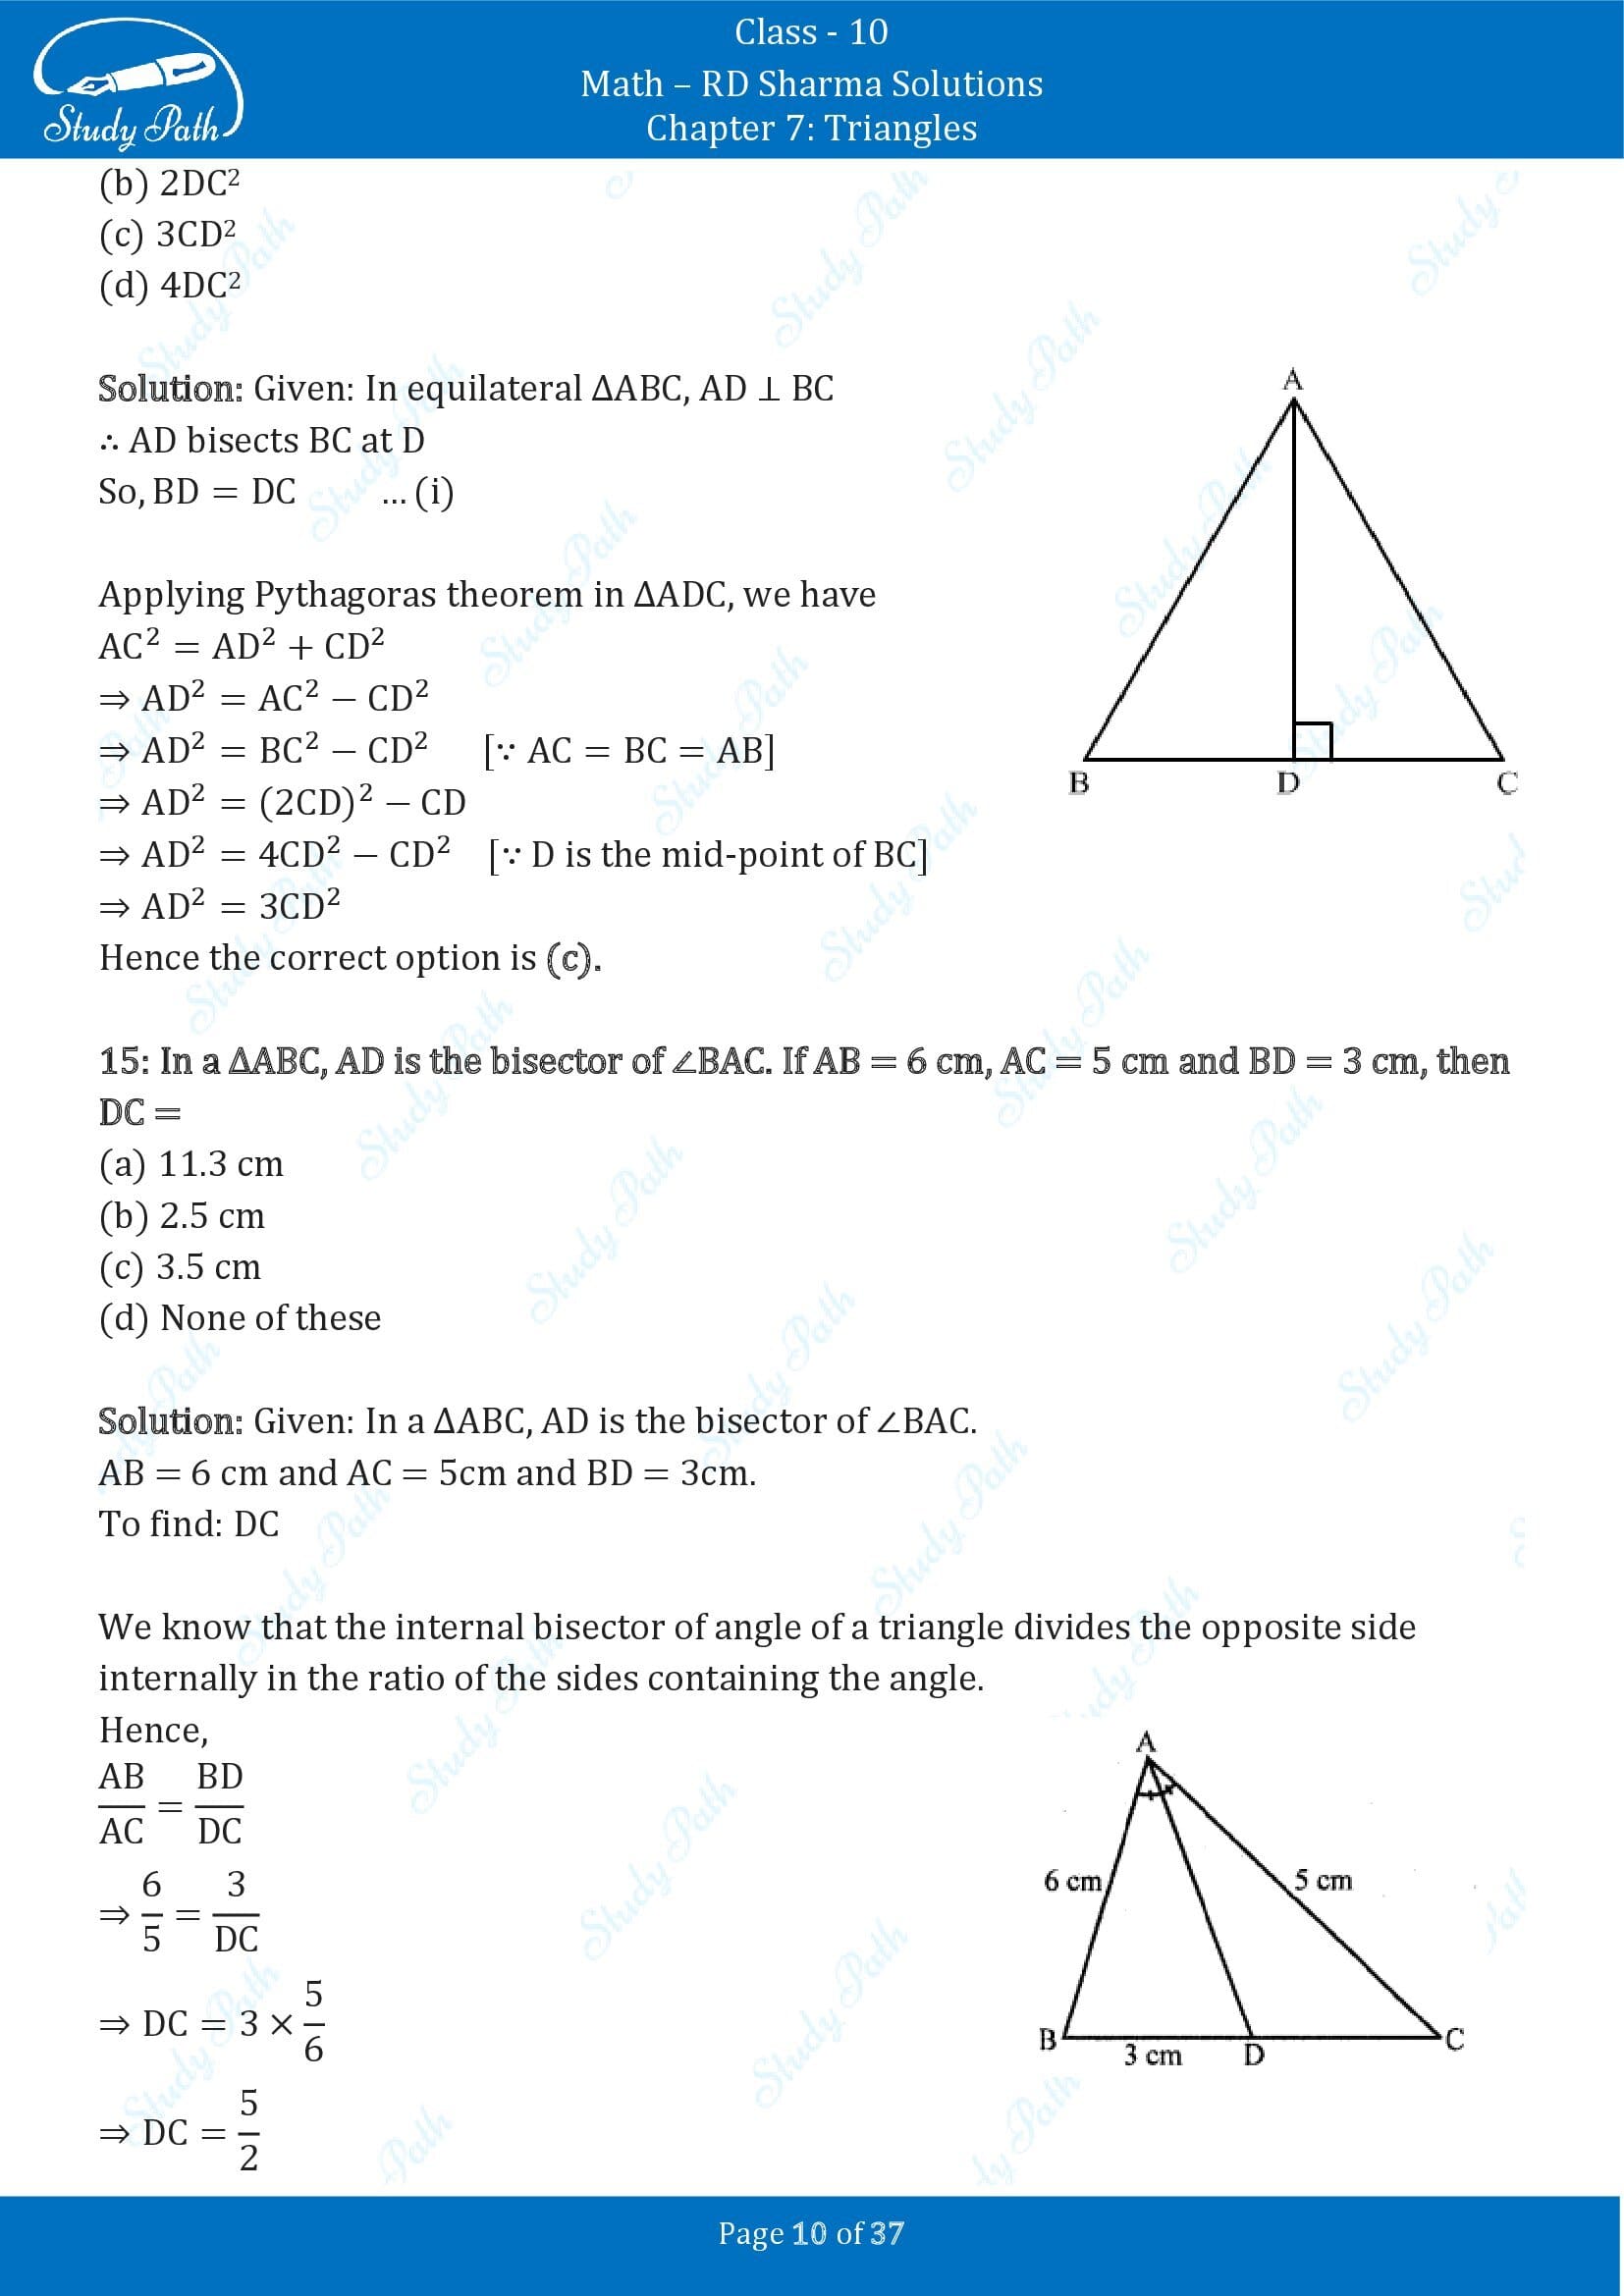 RD Sharma Solutions Class 10 Chapter 7 Triangles Multiple Choice Question MCQs 00010